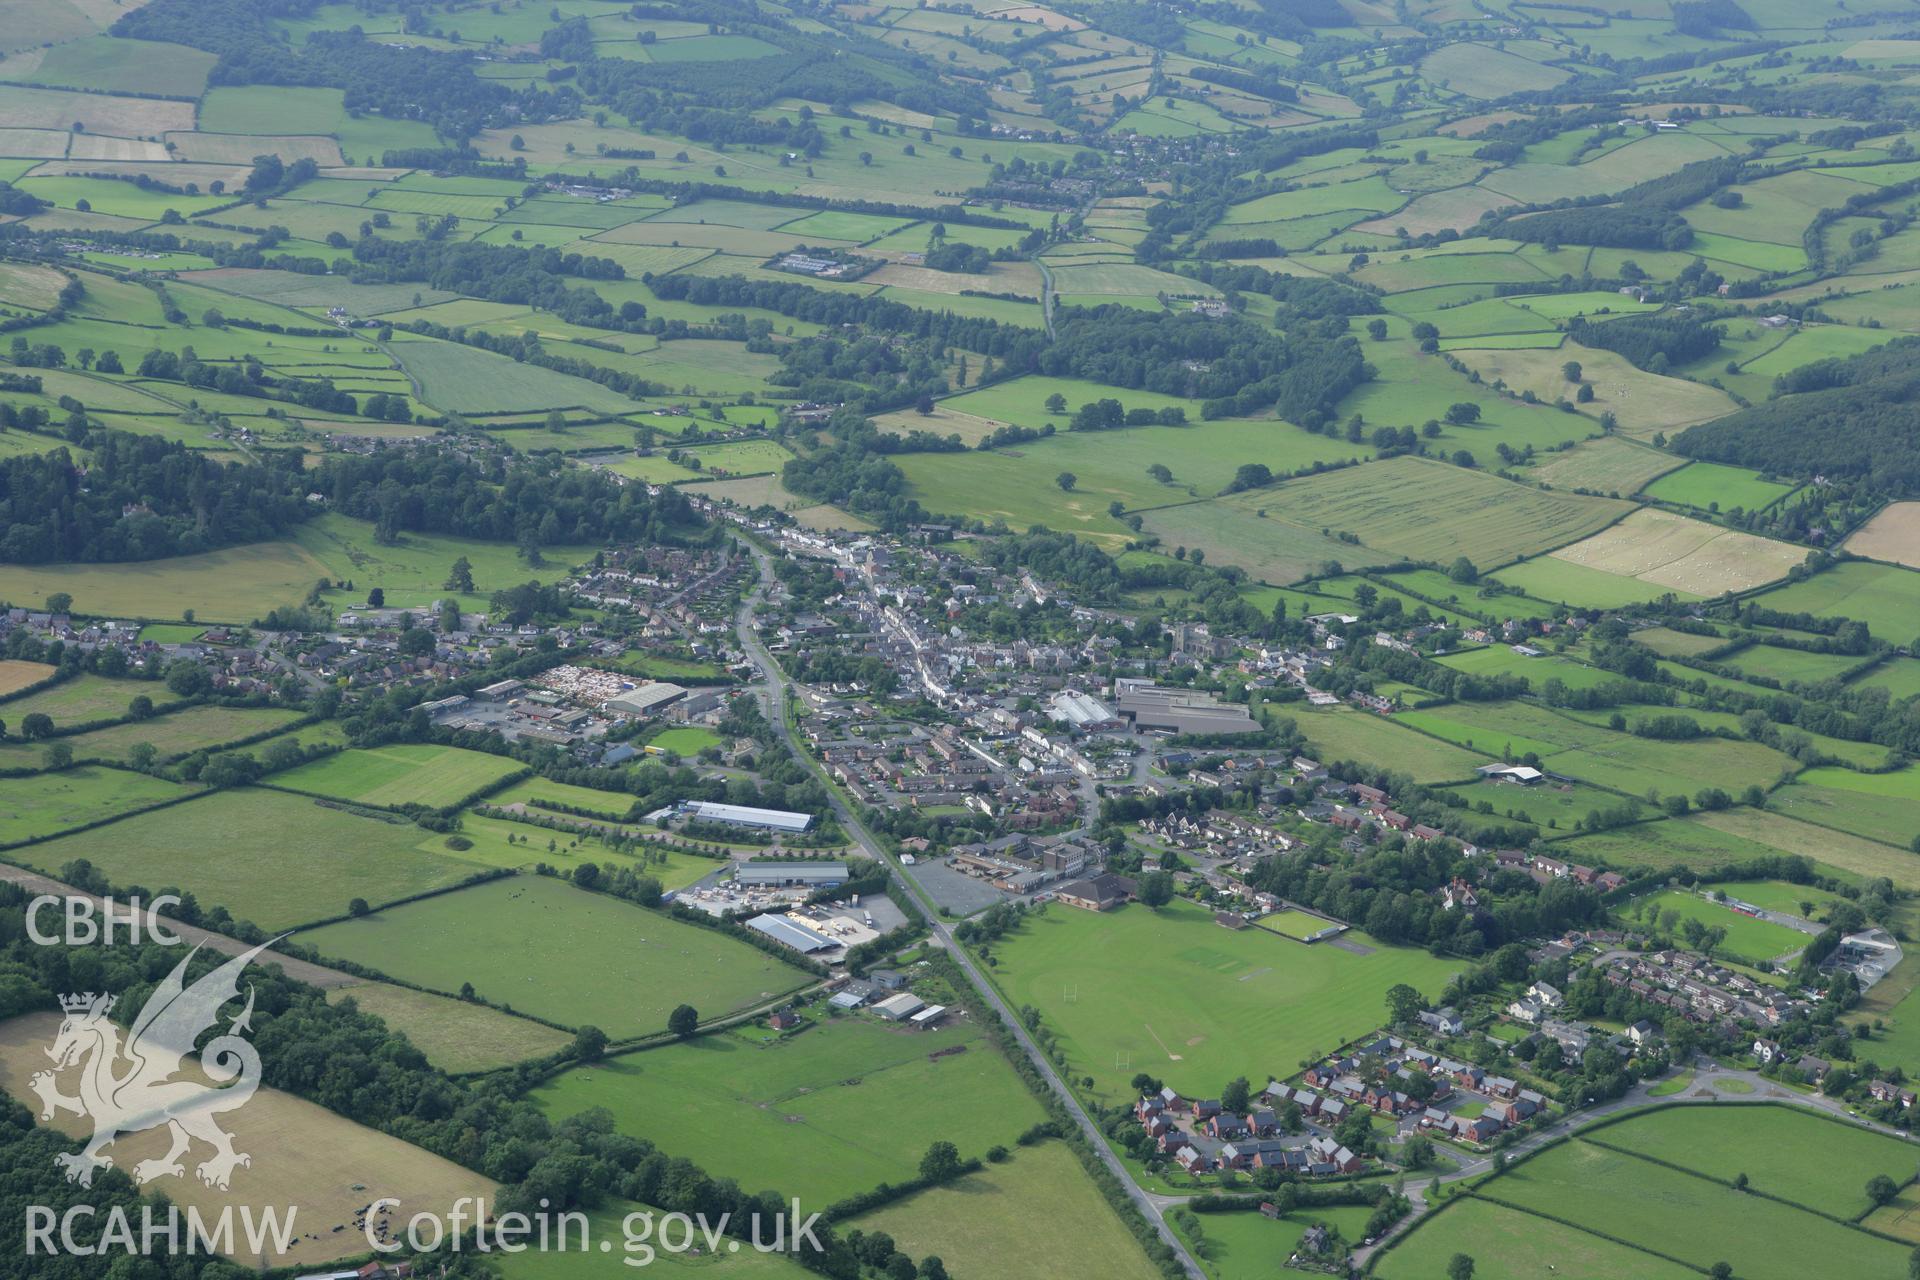 RCAHMW colour oblique aerial photograph of Presteigne. Taken on 09 July 2007 by Toby Driver